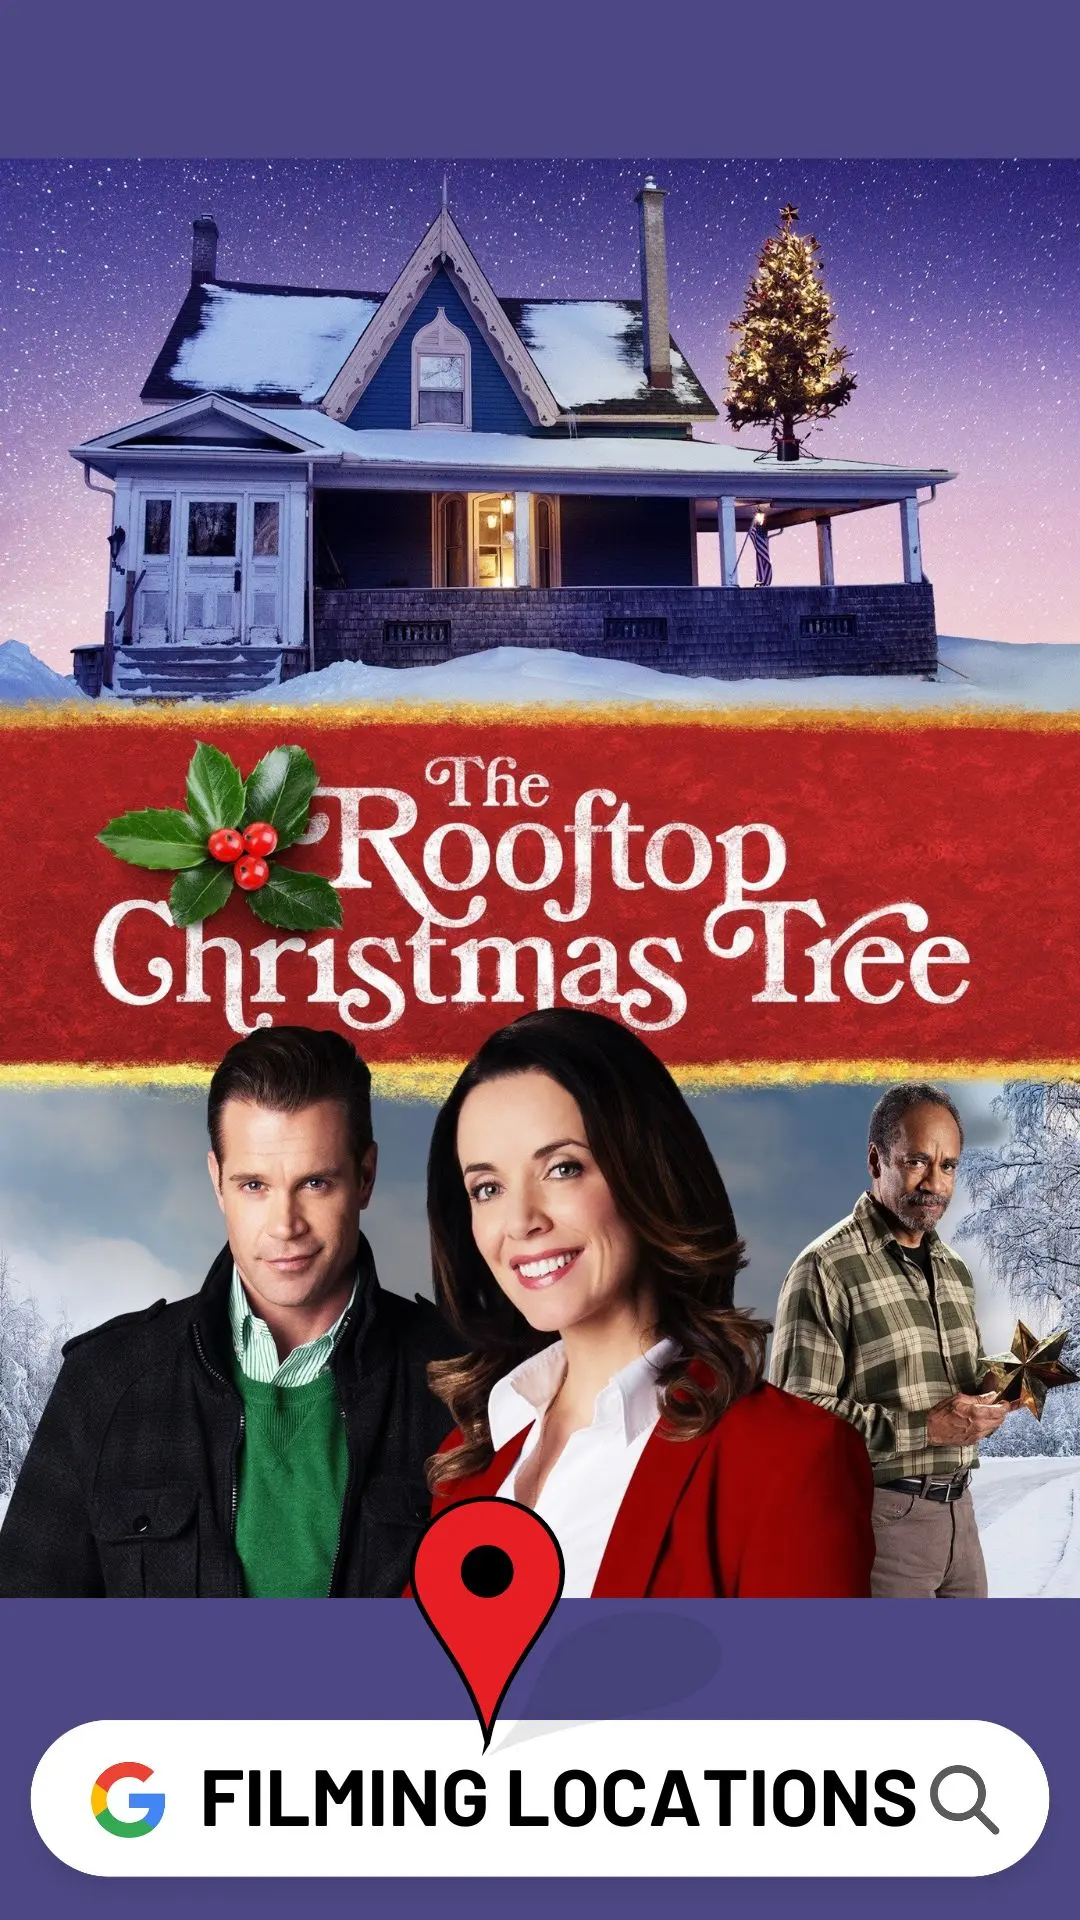 The Rooftop Christmas Tree Filming Locations (1)